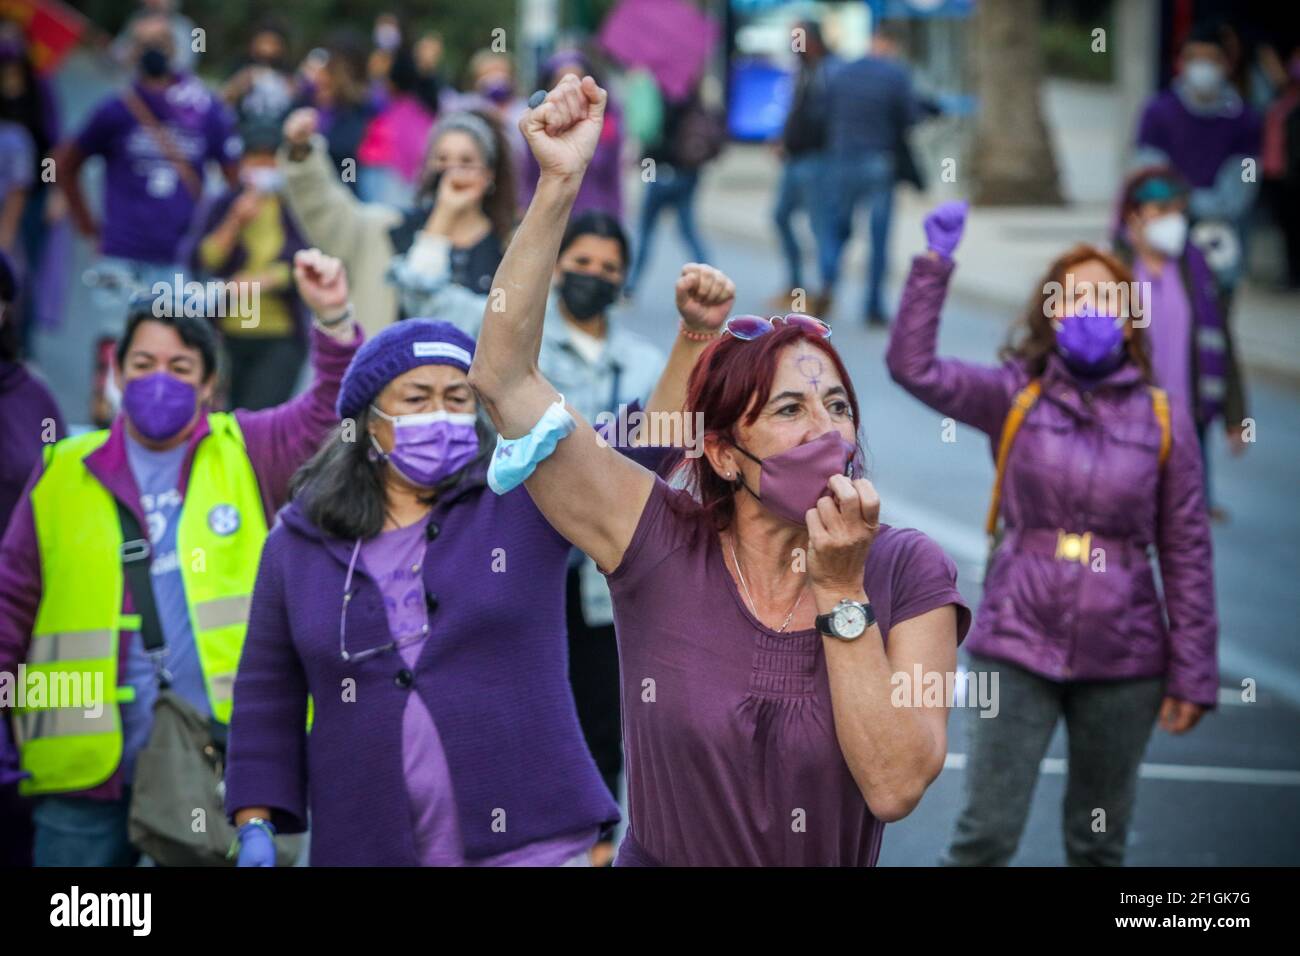 Malaga, Spain. March 8, 2021: 8 March 2021 (Malaga) The platform 8 March Malaga calls for a concentration, feminist dance and manifesto reading. More than a hundred women participate in a performance on the occasion of Women's Day Credit: Lorenzo Carnero/ZUMA Wire/Alamy Live News Stock Photo